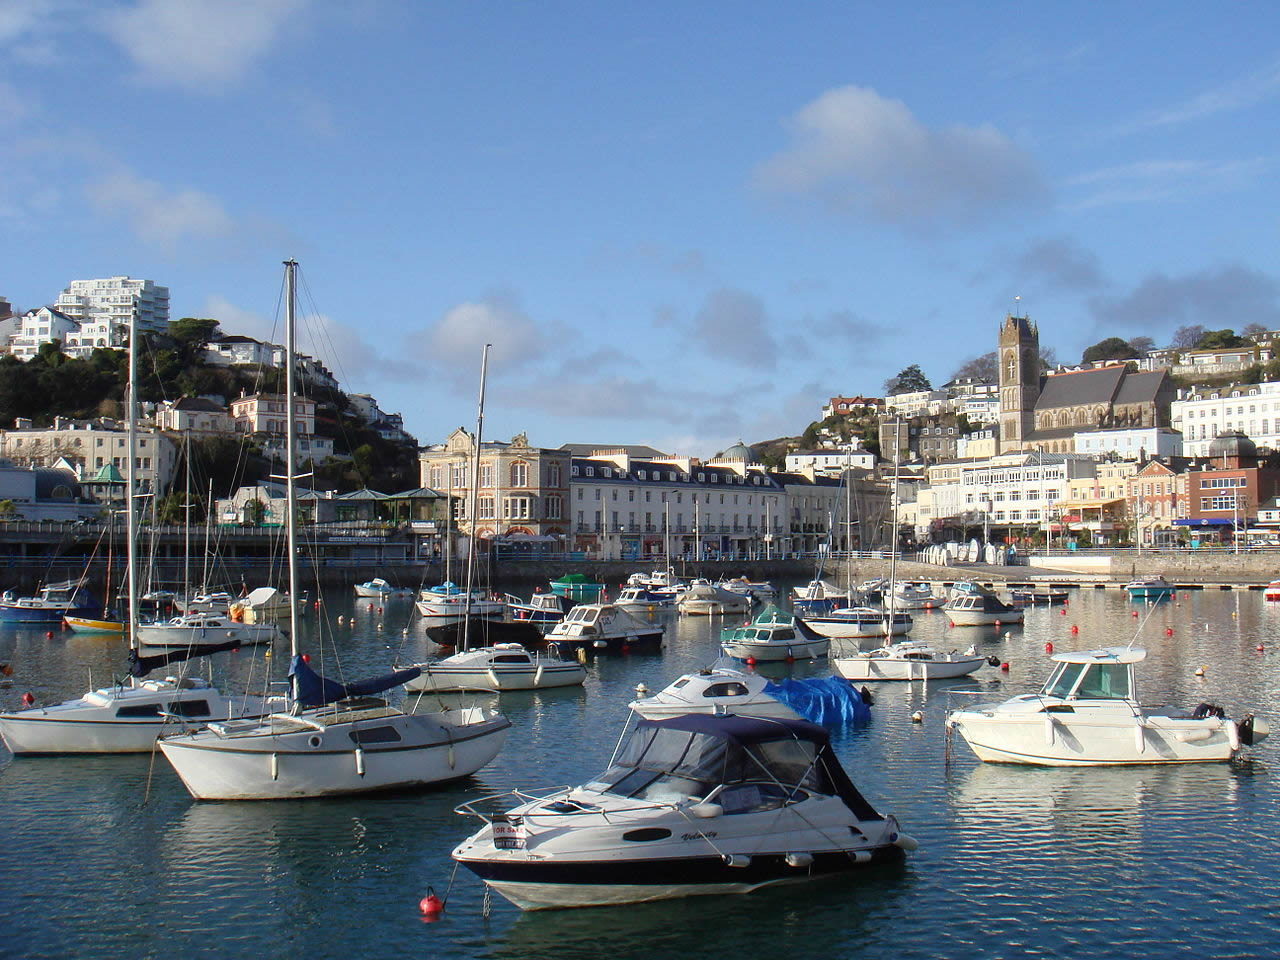 view of Torquay harbour